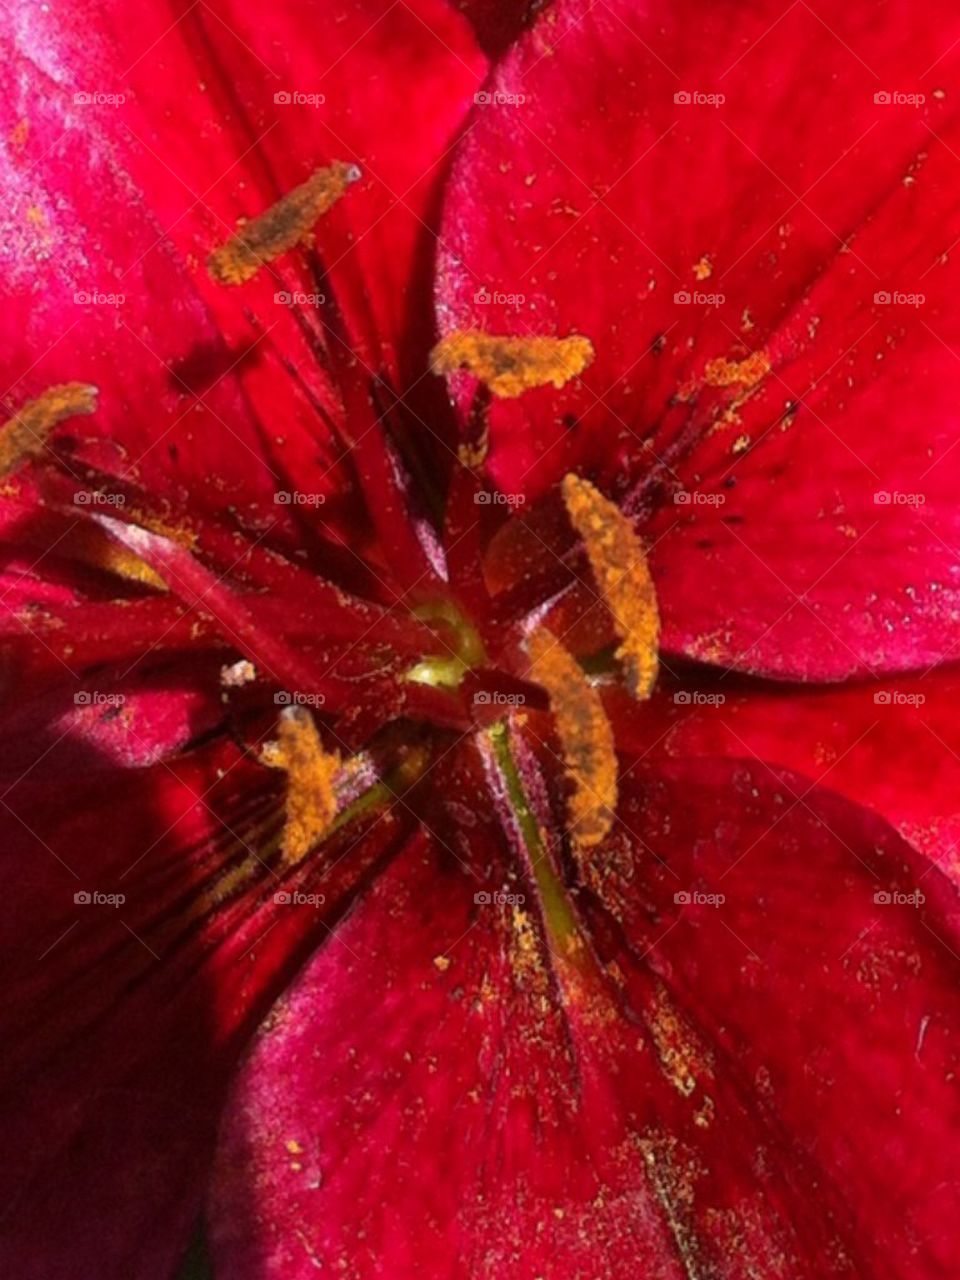 Lily close up 